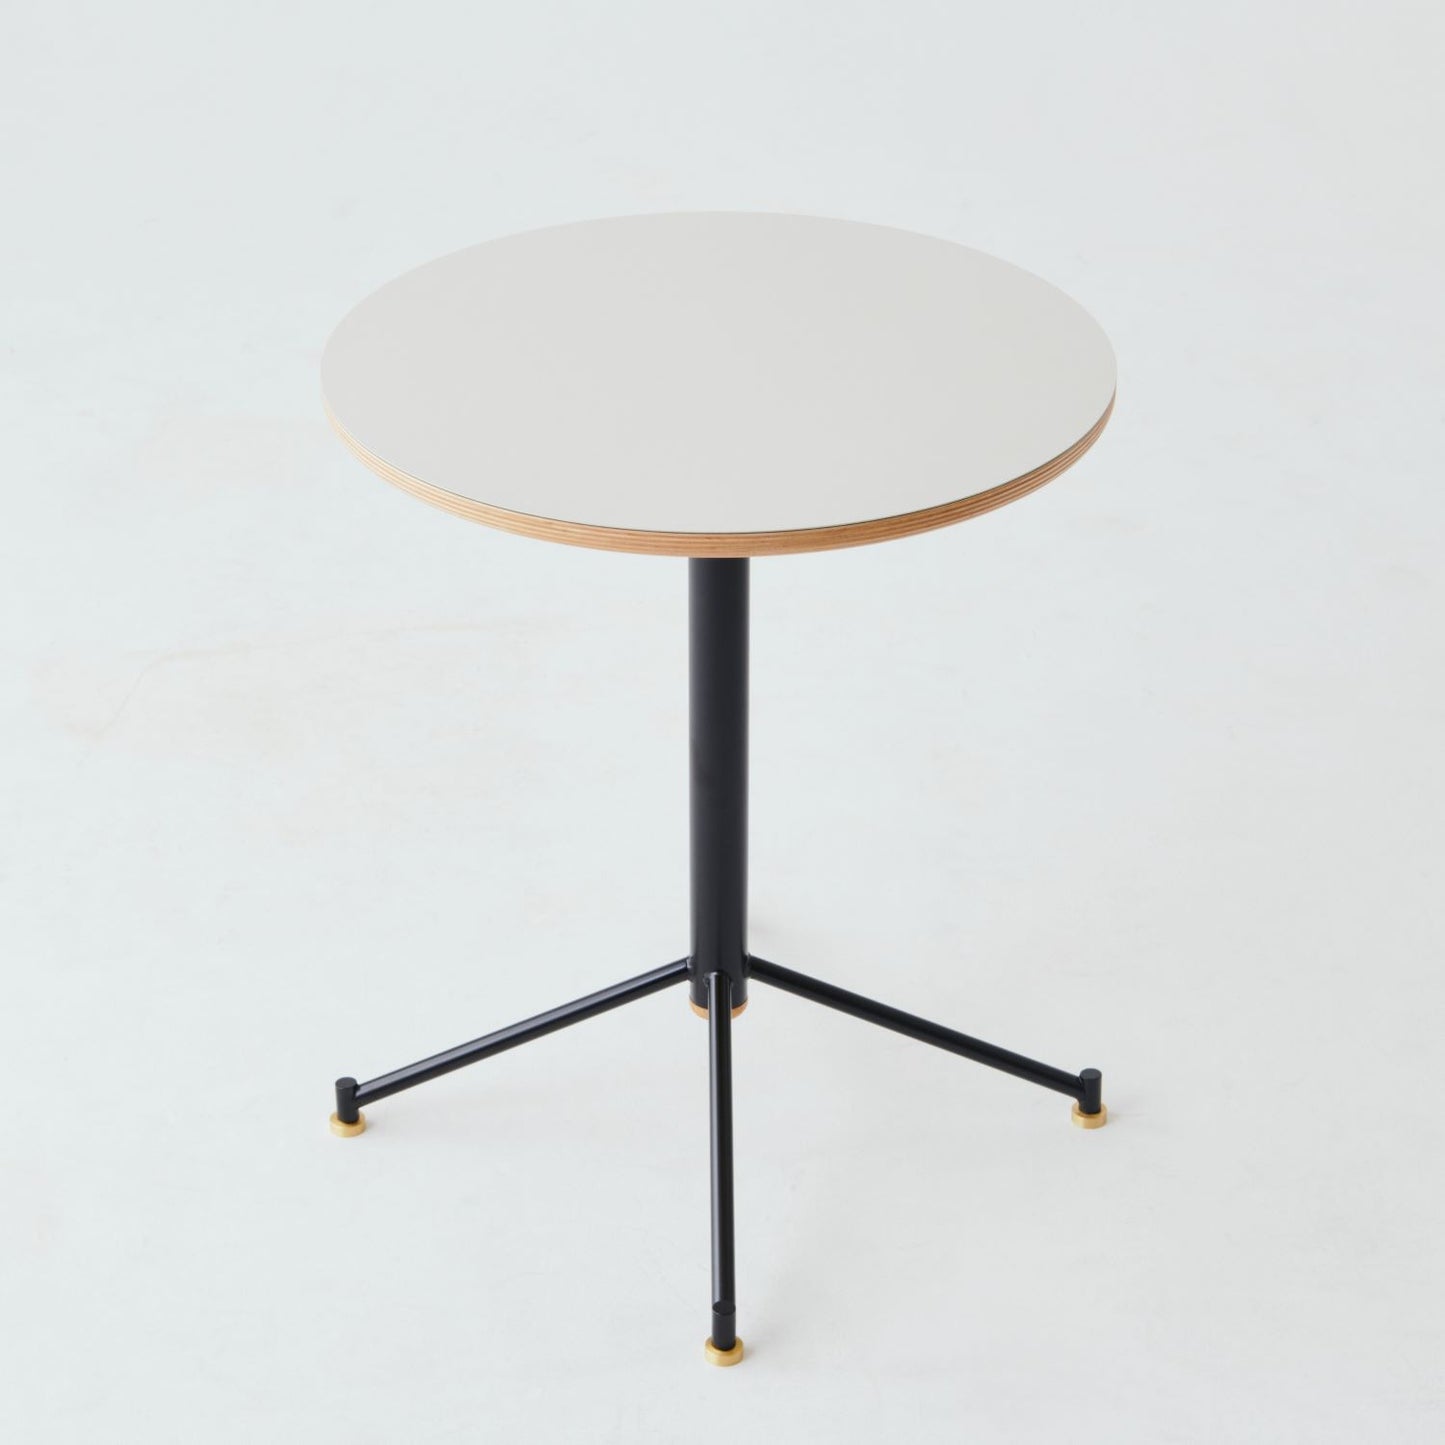 Hemi CafeTable　受注生産品